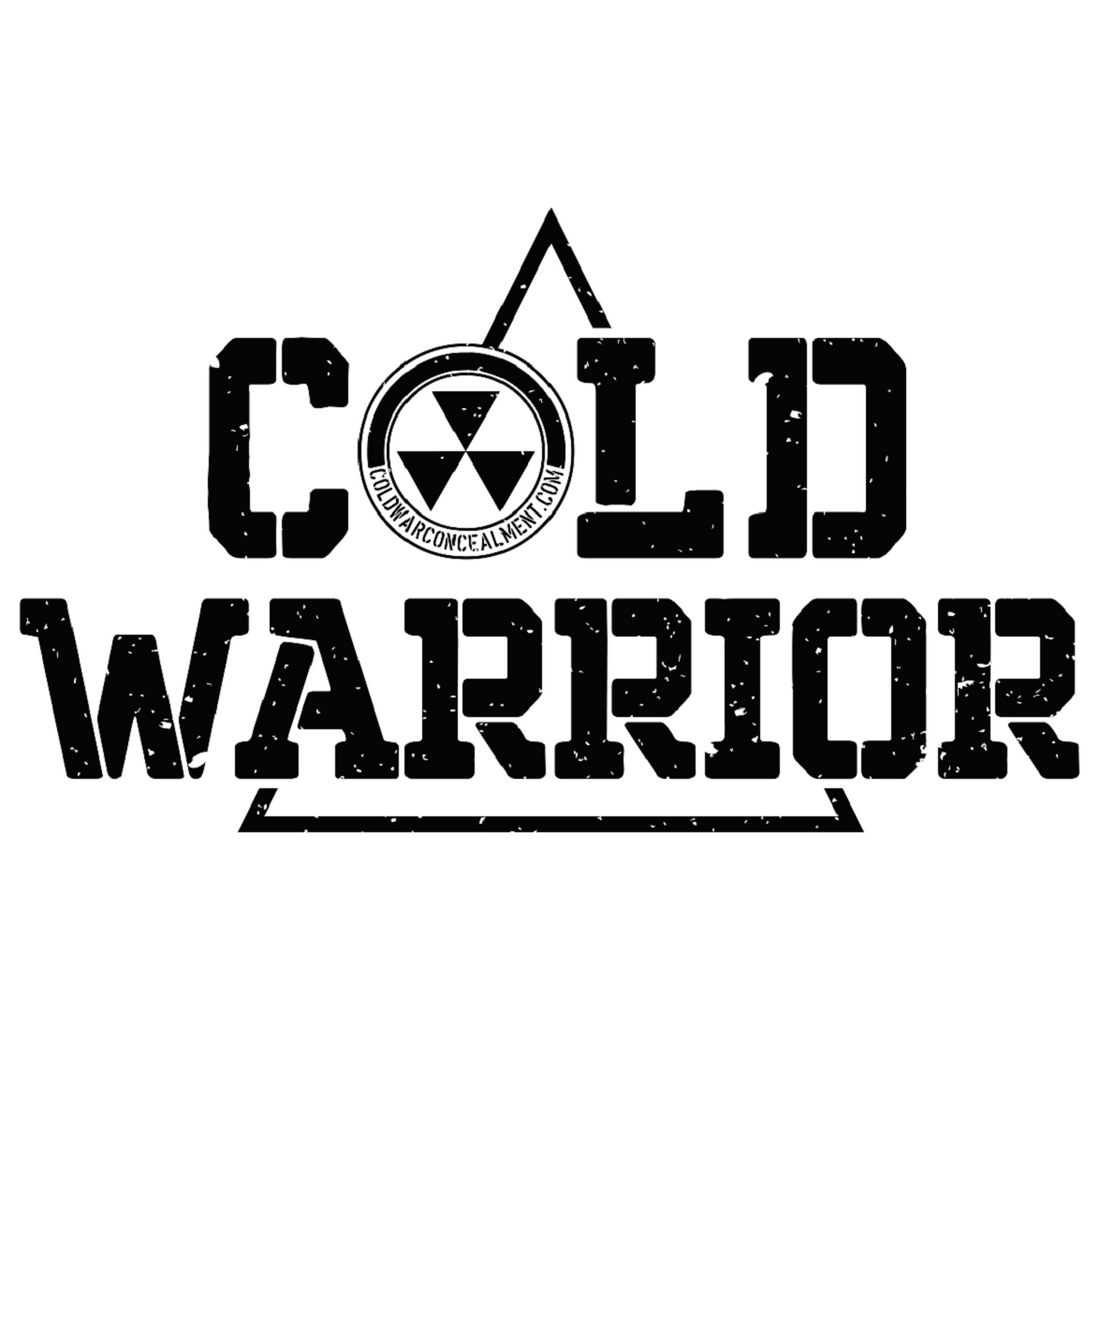 What is a Cold Warrior?